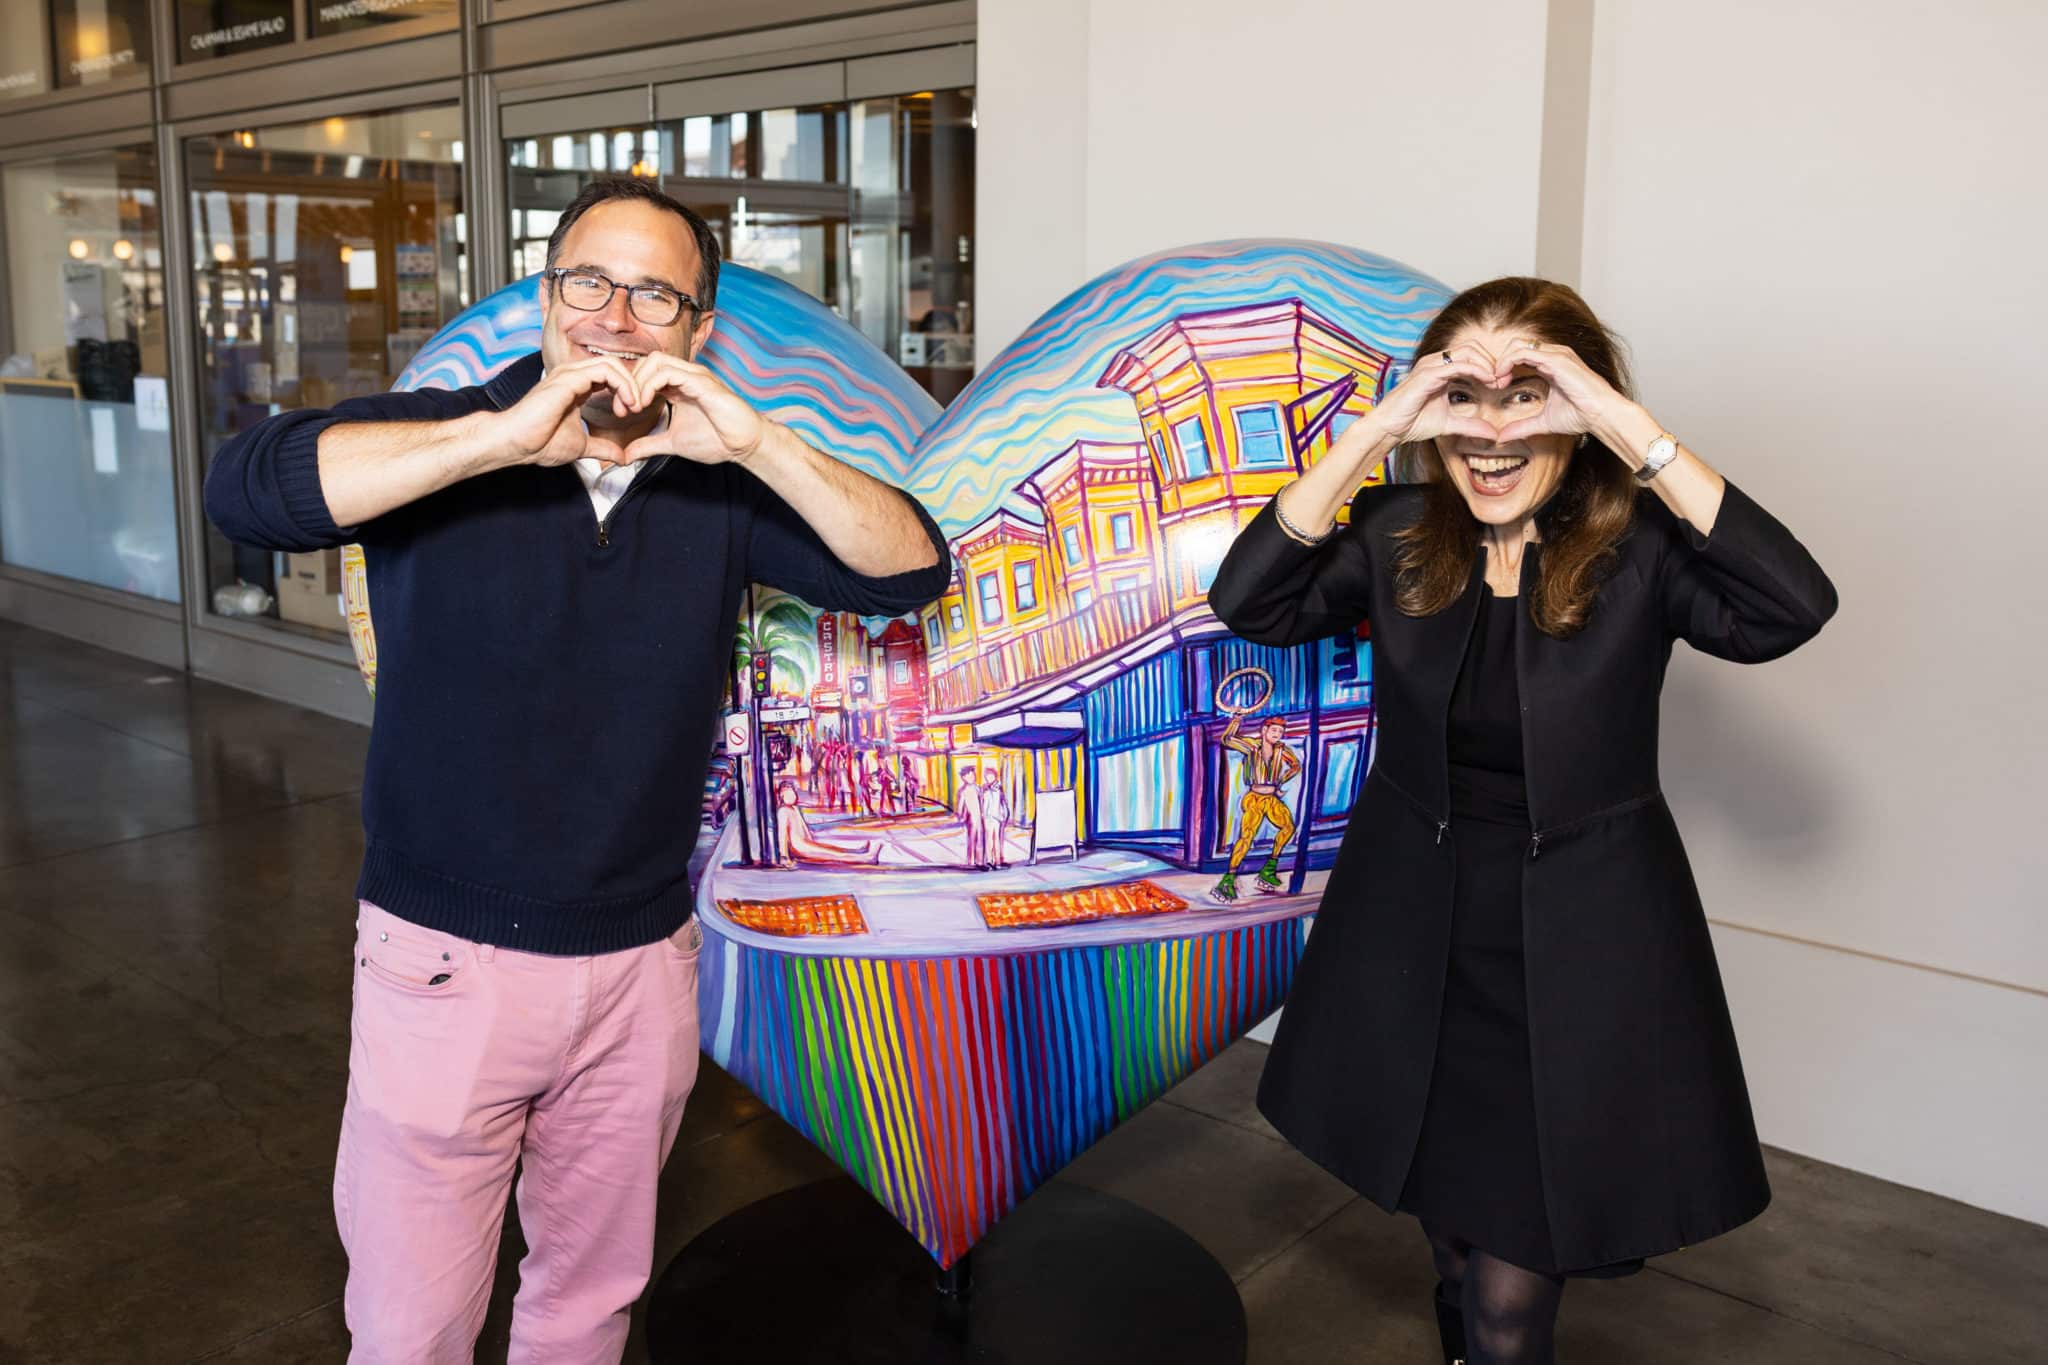 A man and a woman pose making heart shapes with their hands in front of a heart sculpture depicting a colorful SF city street. 